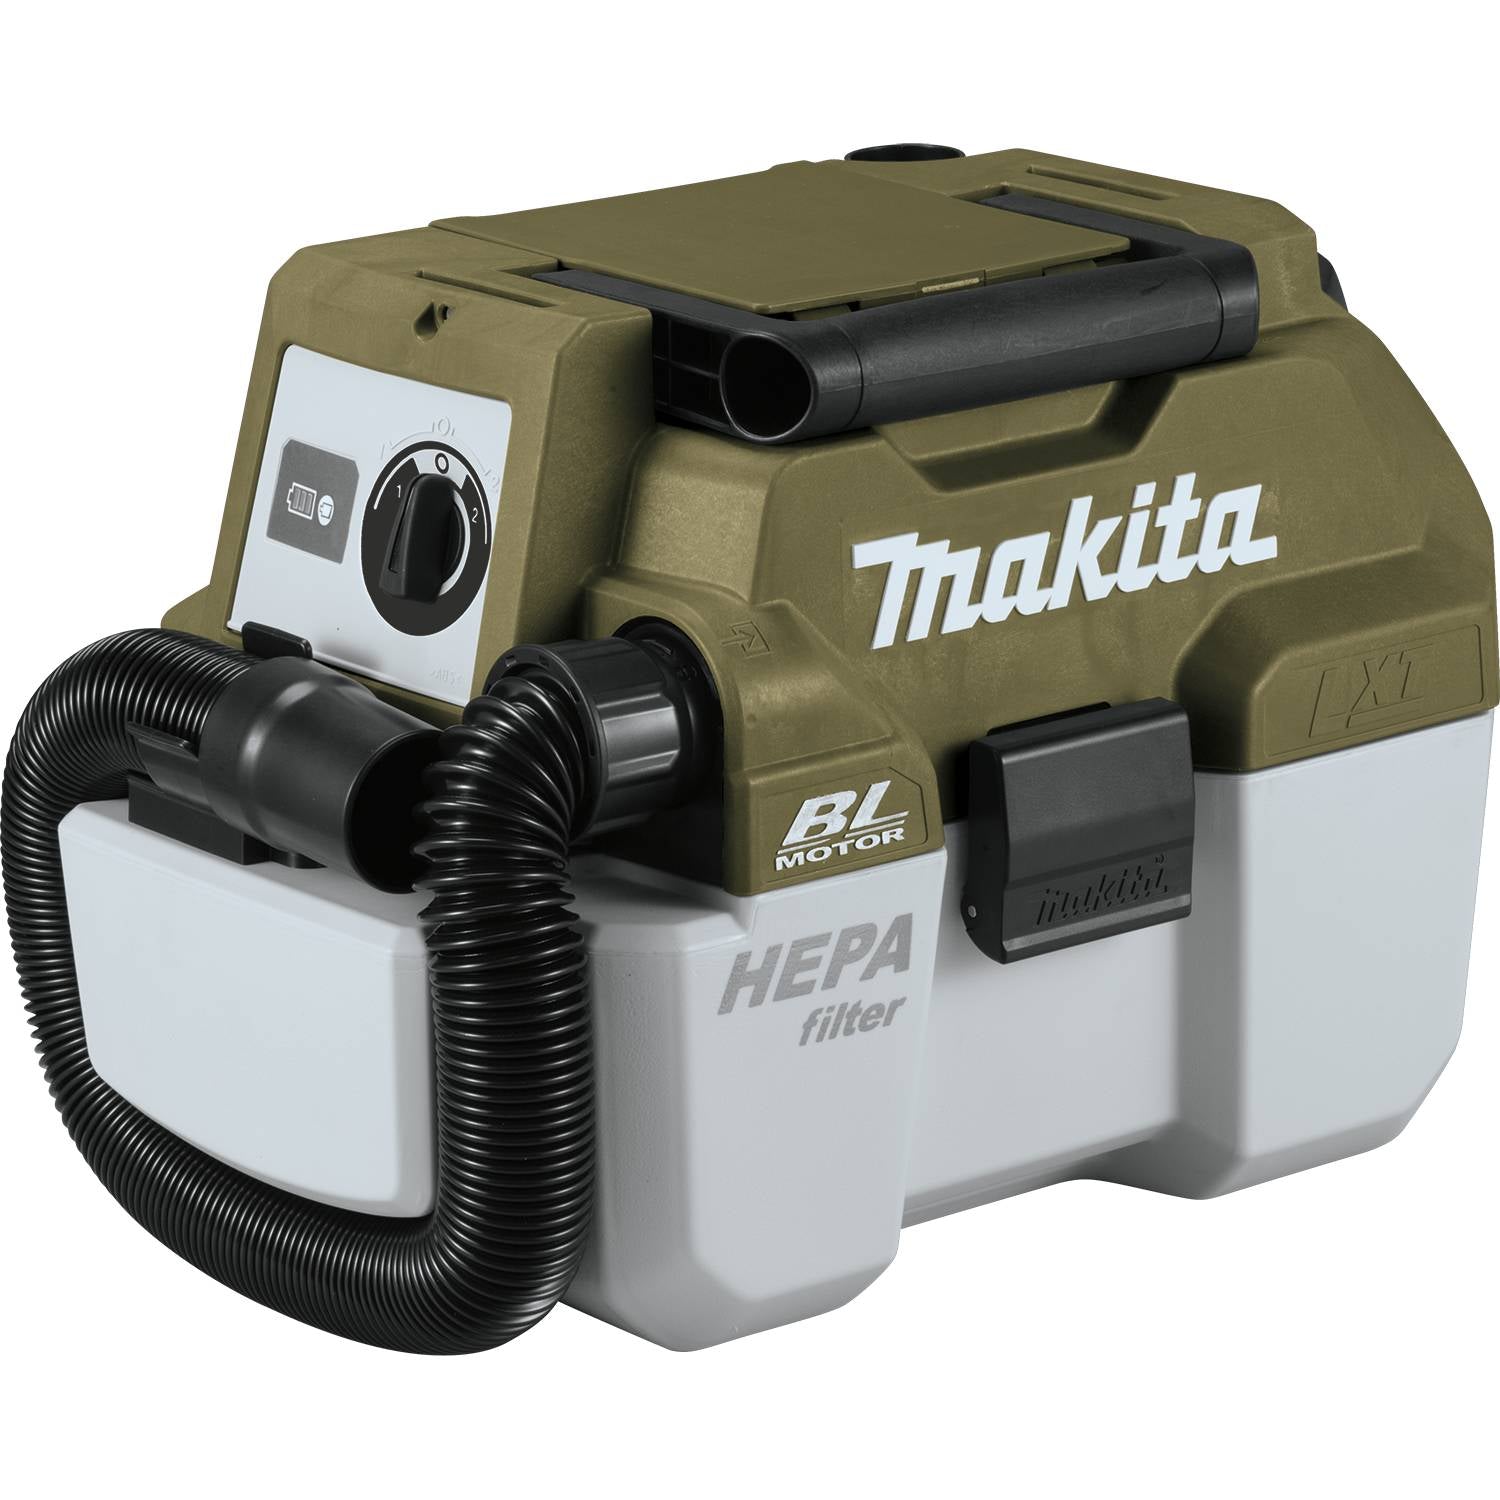 Photos - Mobile Phone Battery Makita ADCV11Z Outdoor Adventure 18V LXT Lithium-Ion Brushless Cordless We 